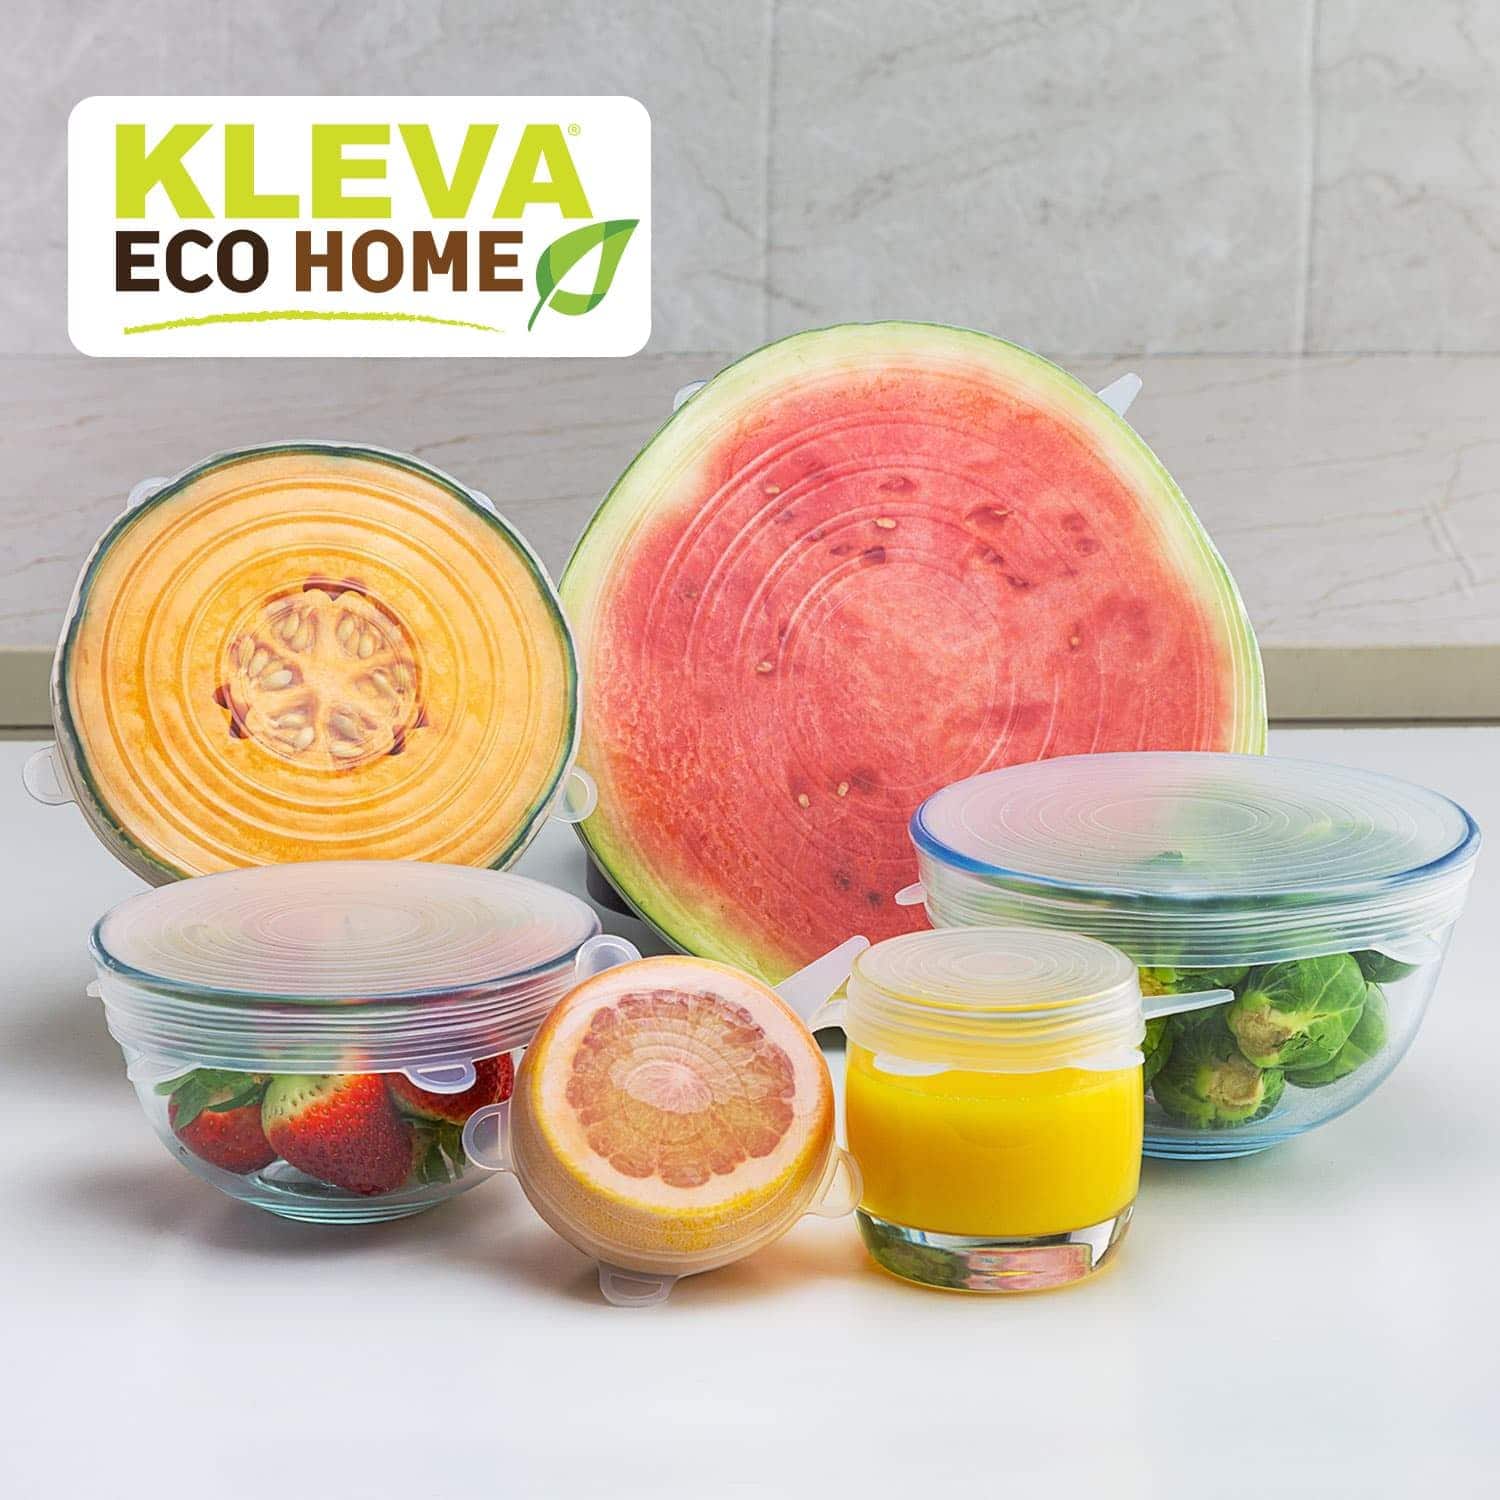 Flexi Stretchy Eco Lids - Reusable, Silicone Food Covers Perfect For Leftovers UPSELL Kleva Range - Everyday Innovations   